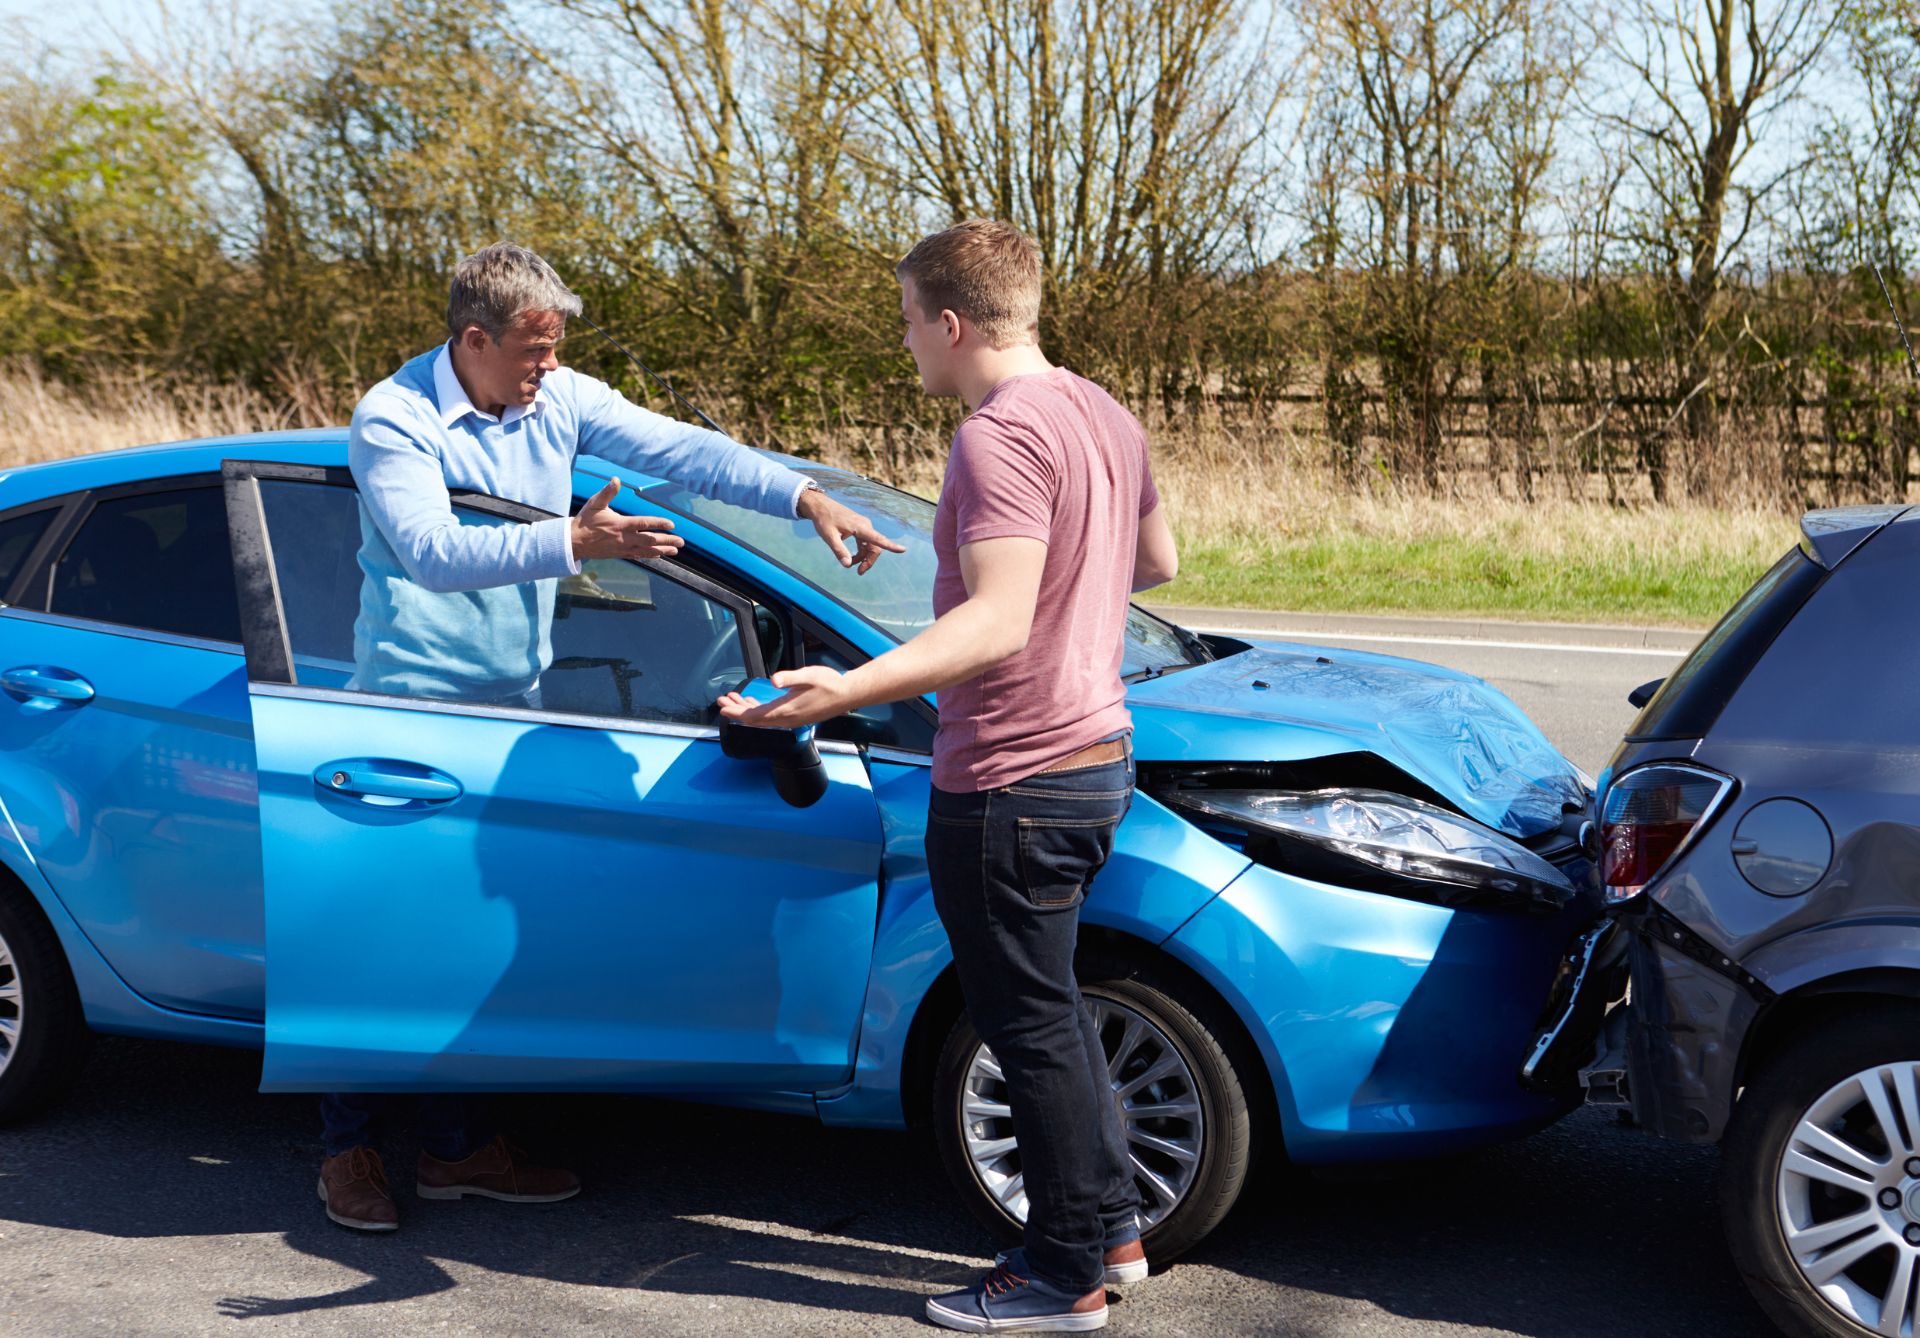 Two men standing next to a blue car after a car accident involving workers compensation.